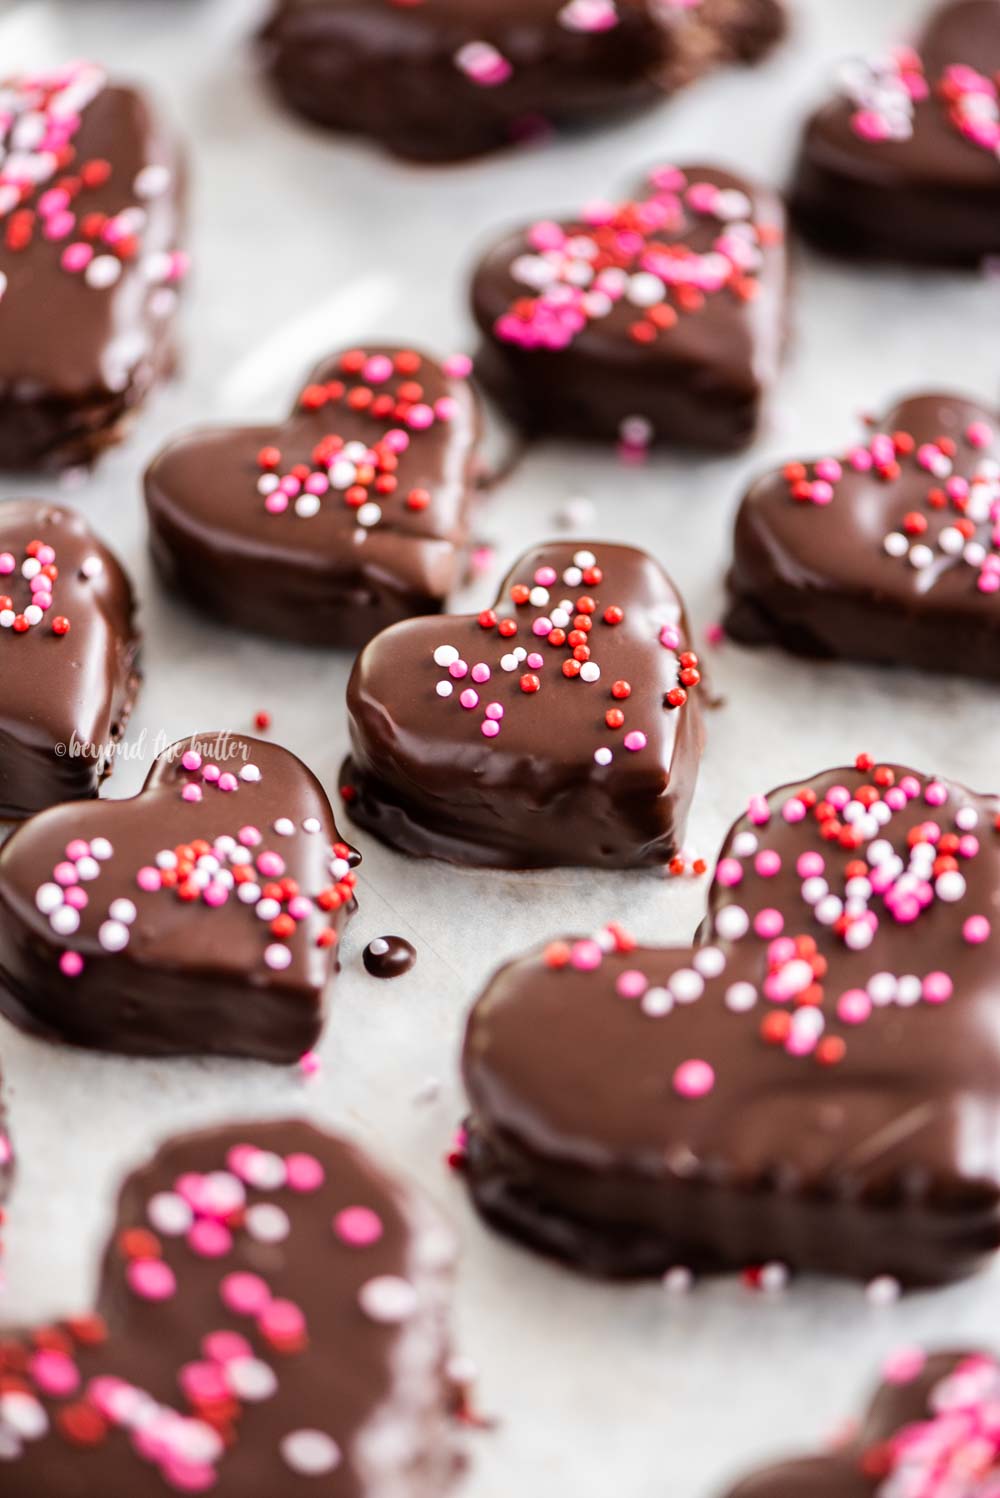 Overhead image of chocolate covered cookie dough hearts with sprinkles | All Images © Beyond the Butter, LLC